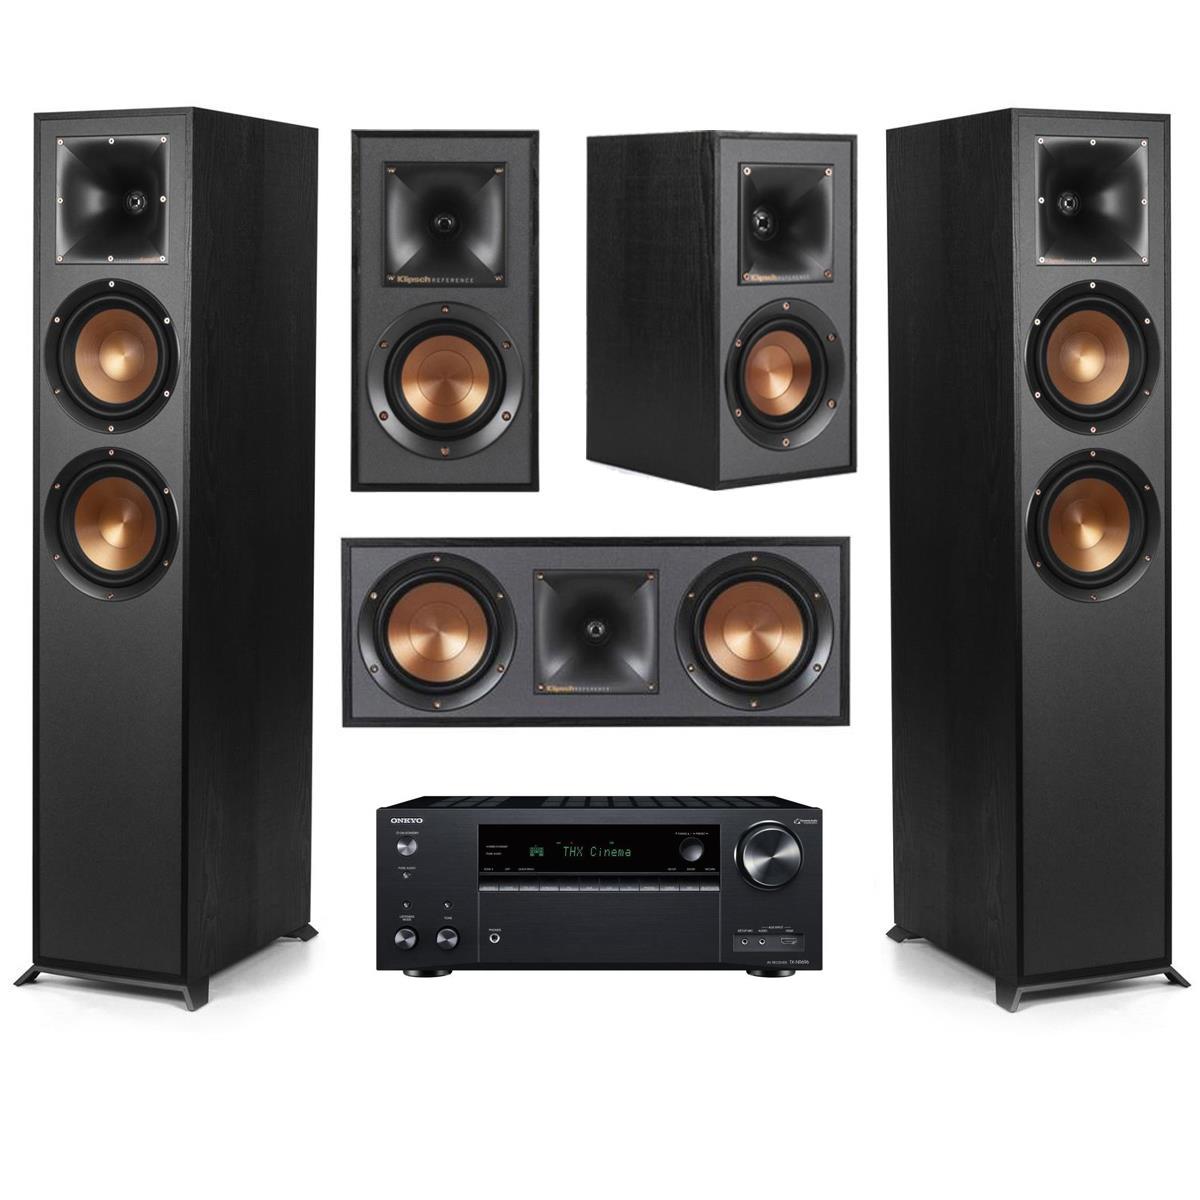 

Klipsch Reference 5.0 Home Theater System, Black w/ Denon AVR-S970H 7.2 Receiver